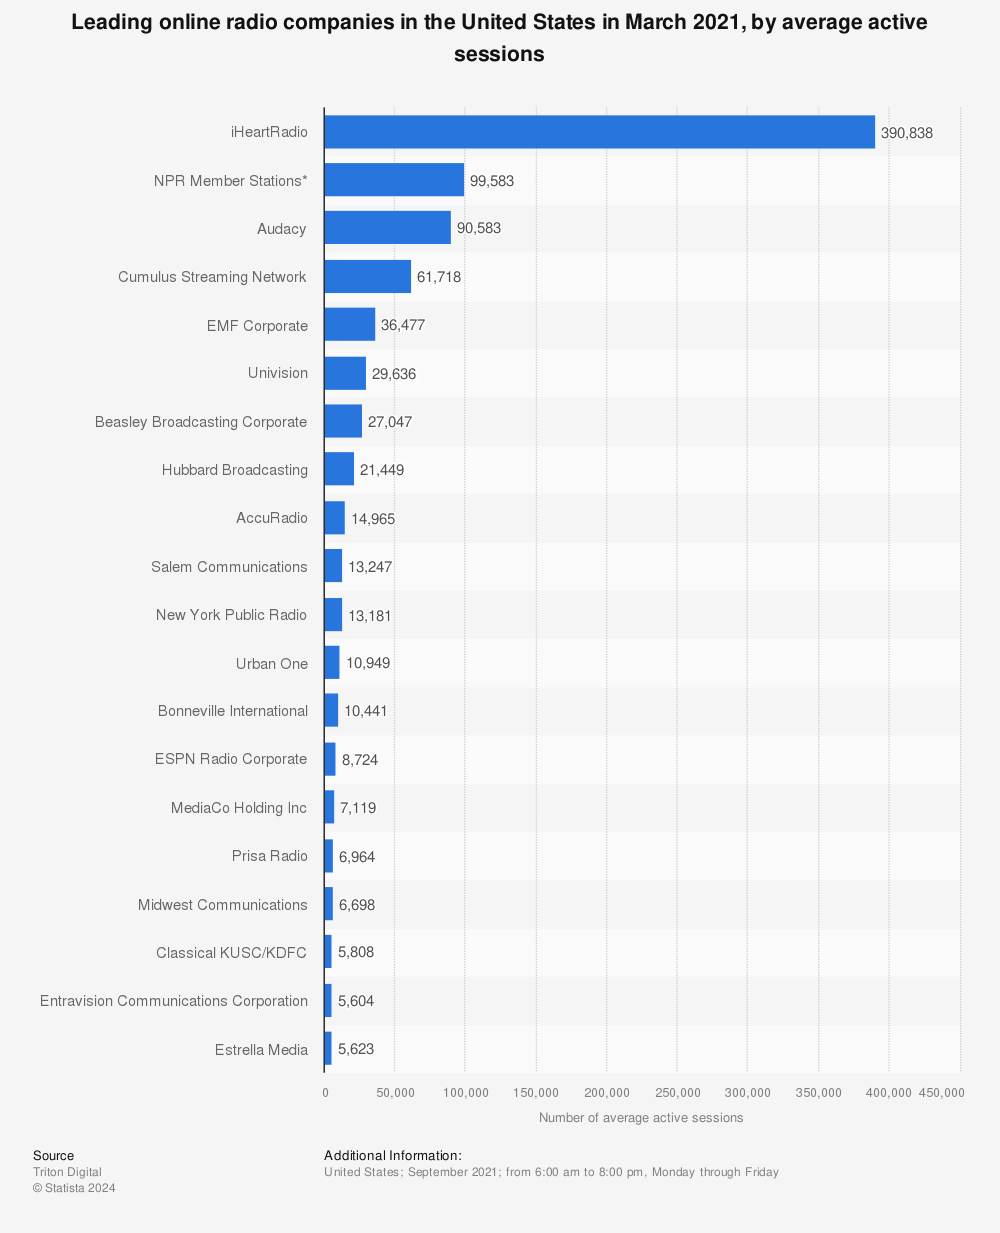 Statistic: Leading online radio companies in the United States in March 2021, by average active sessions | Statista